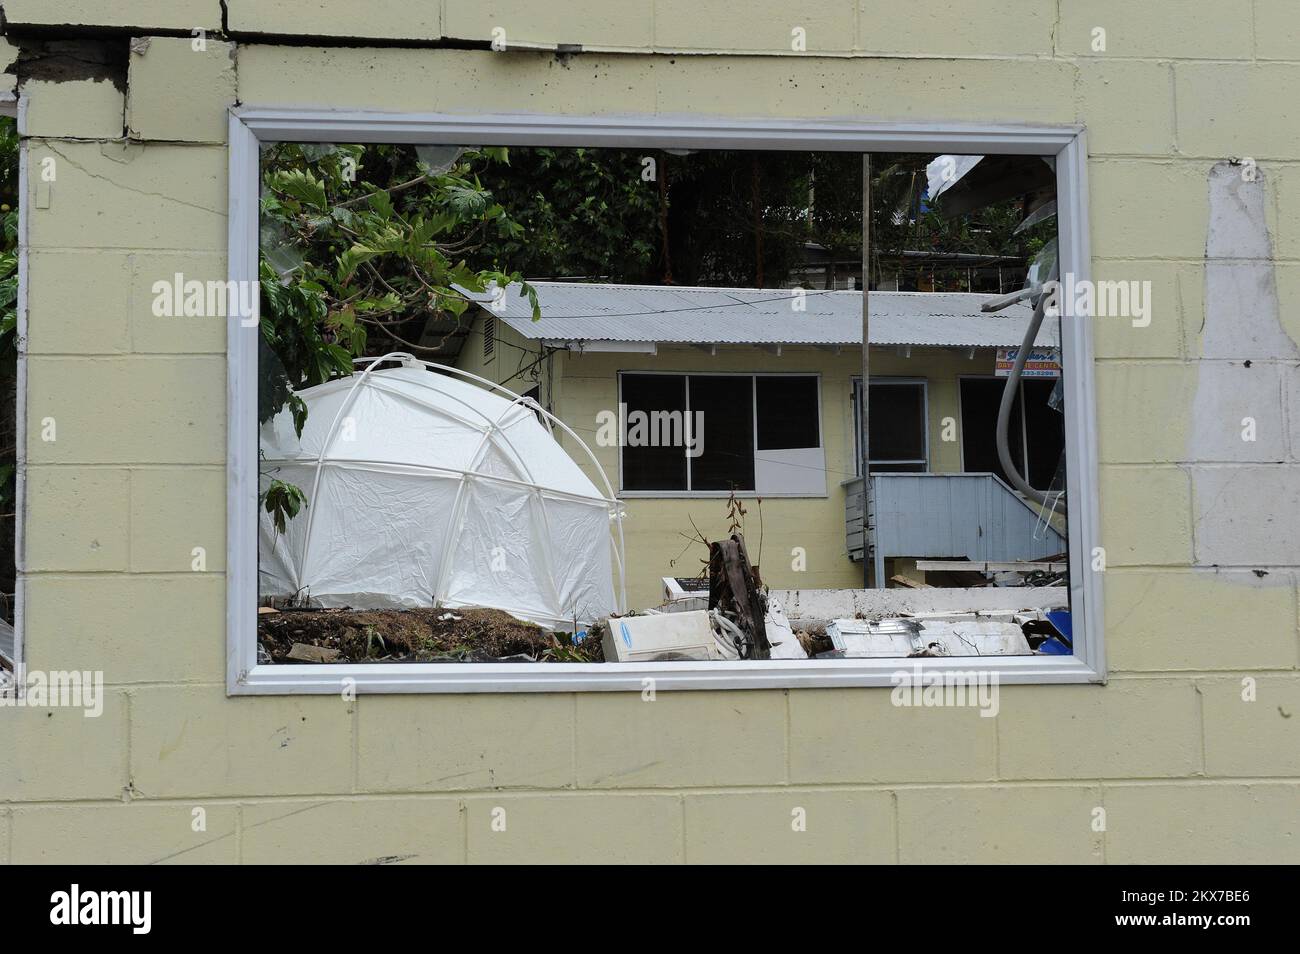 Federal Emergency Management Agency Tent In American Samoa. American Samoa Earthquake, Tsunami, and Flooding. Photographs Relating to Disasters and Emergency Management Programs, Activities, and Officials Stock Photo